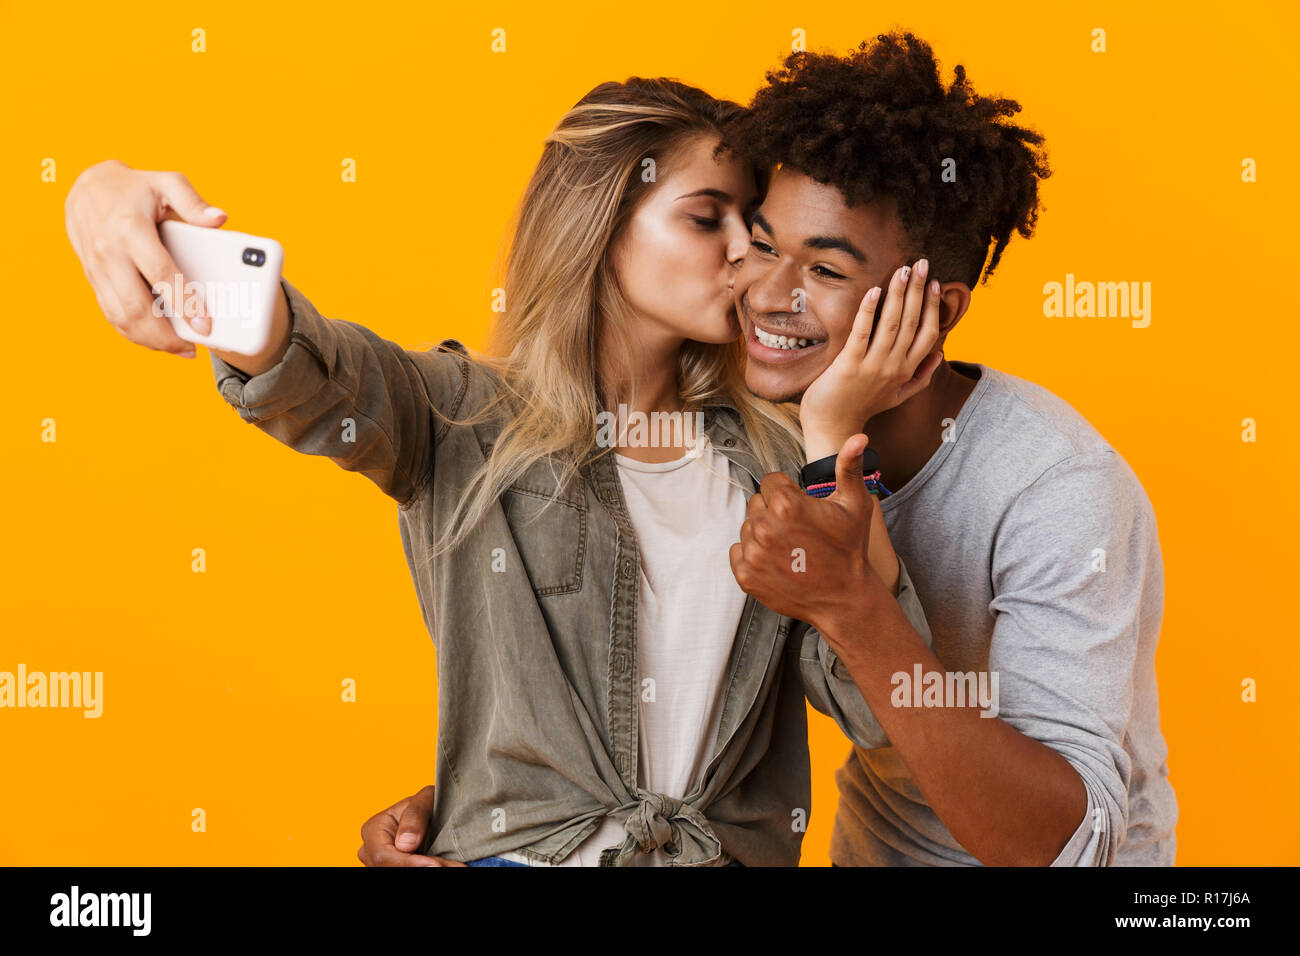 A Couple Taking Selfie while Wearing Sunglasses · Free Stock Photo